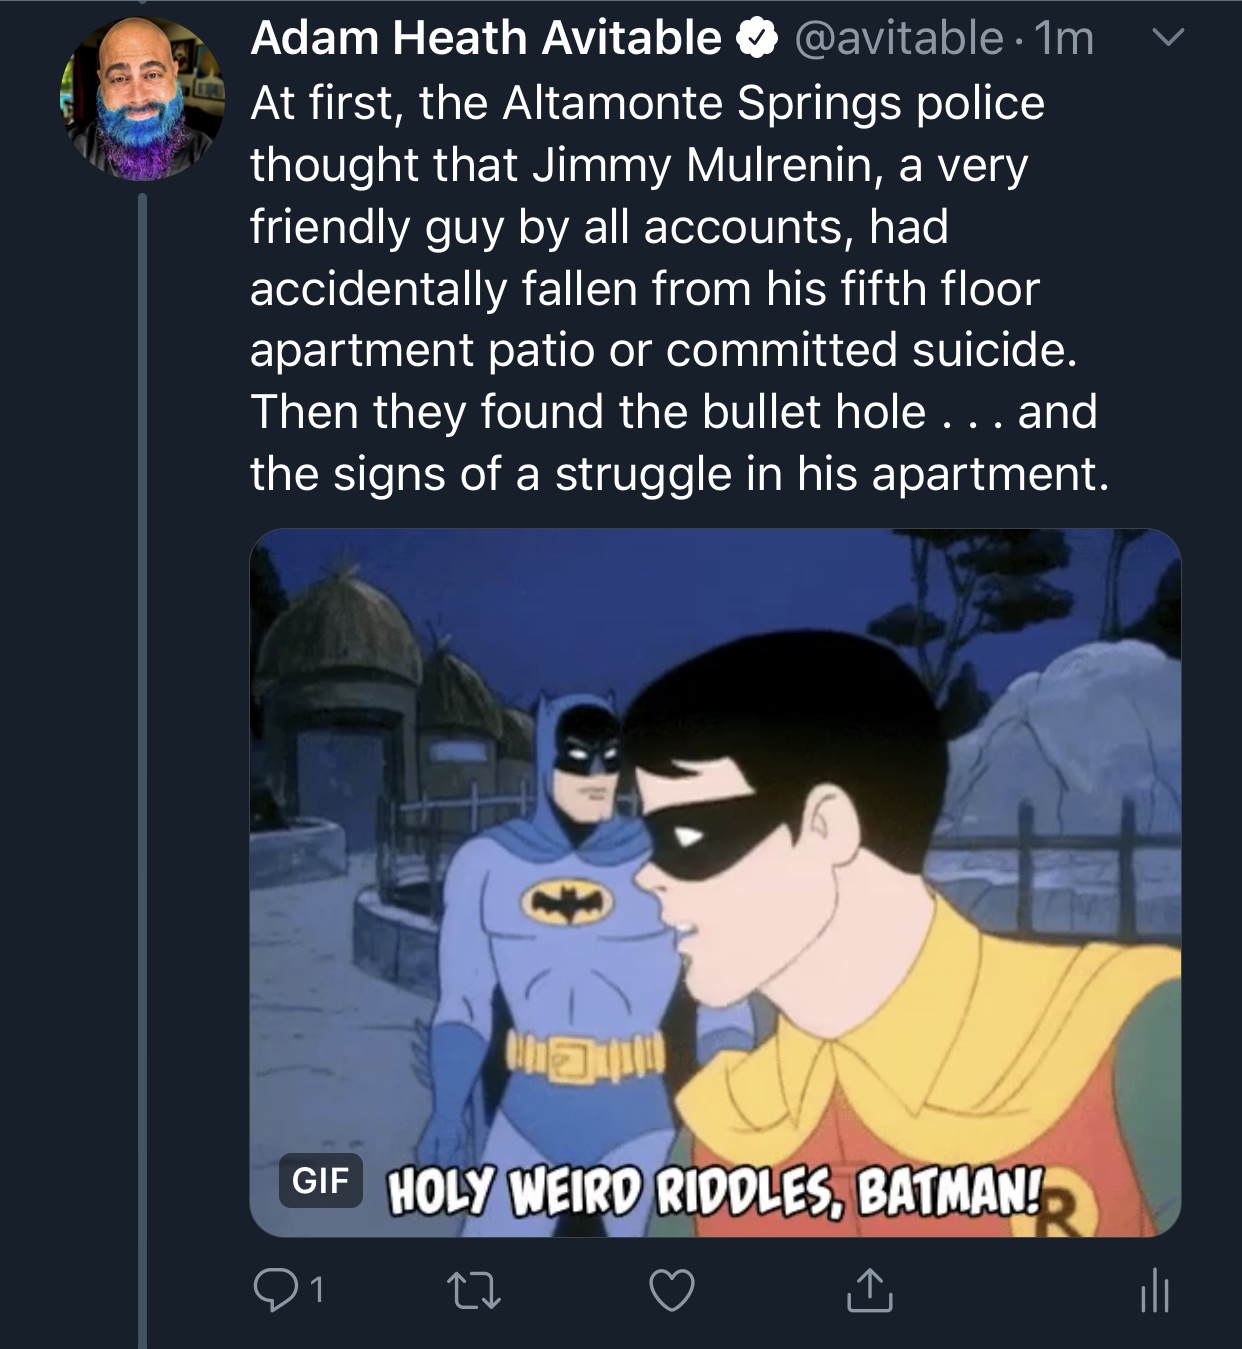 batman and robin cartoon - v Adam Heath Avitable 1m At first, the Altamonte Springs police thought that Jimmy Mulrenin, a very friendly guy by all accounts, had accidentally fallen from his fifth floor apartment patio or committed suicide. Then they found